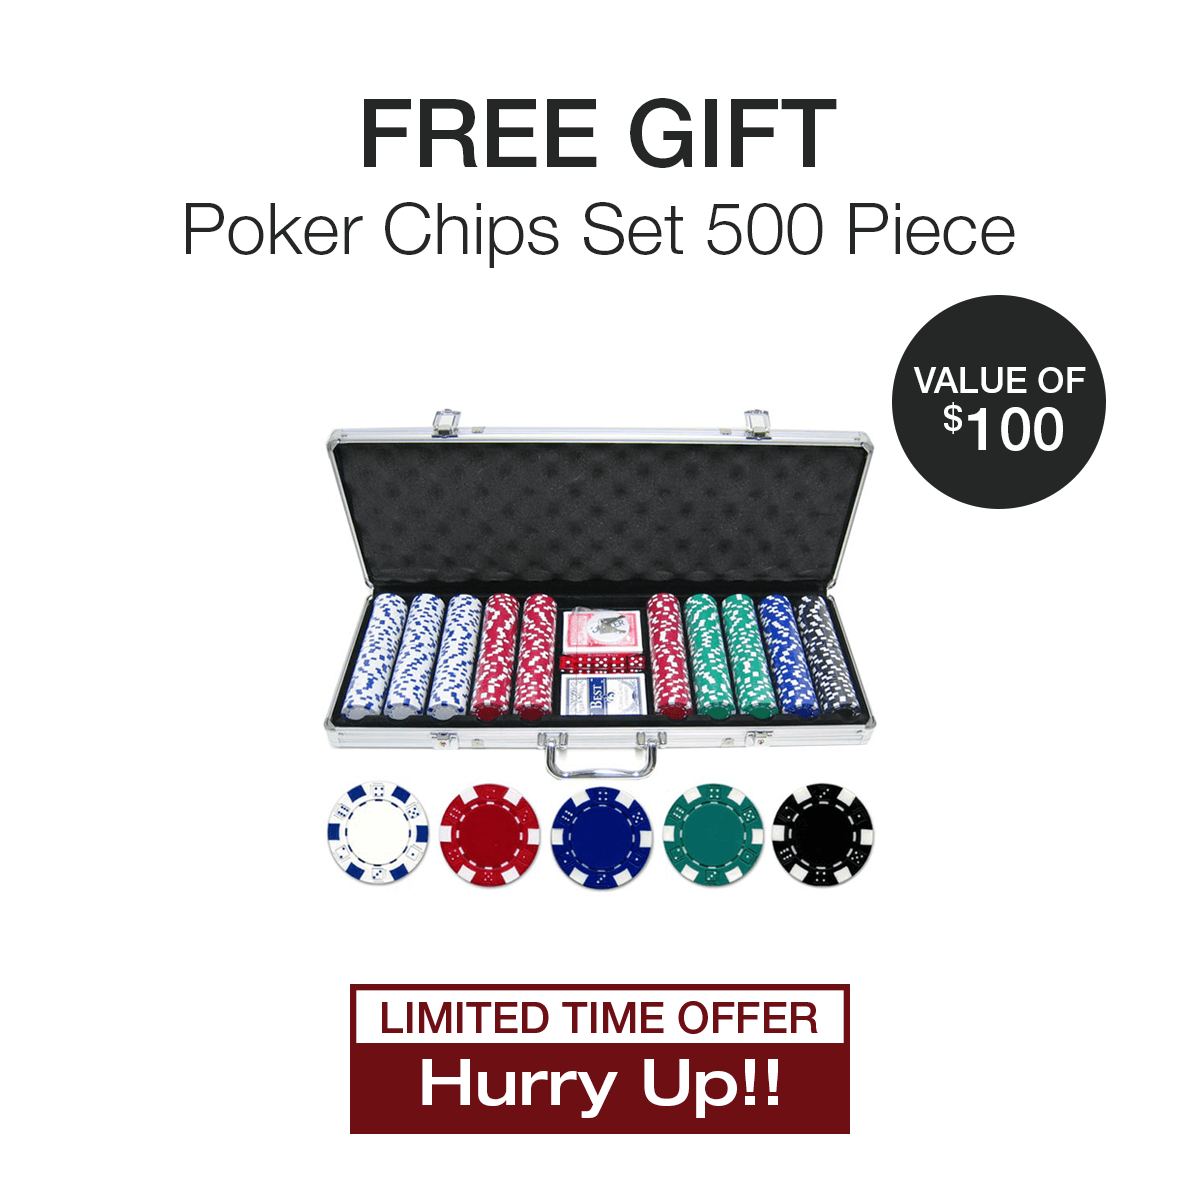 BBO Poker Tables Aces Pro Folding Poker Table 10 Person with Dealer - Just Poker Tables